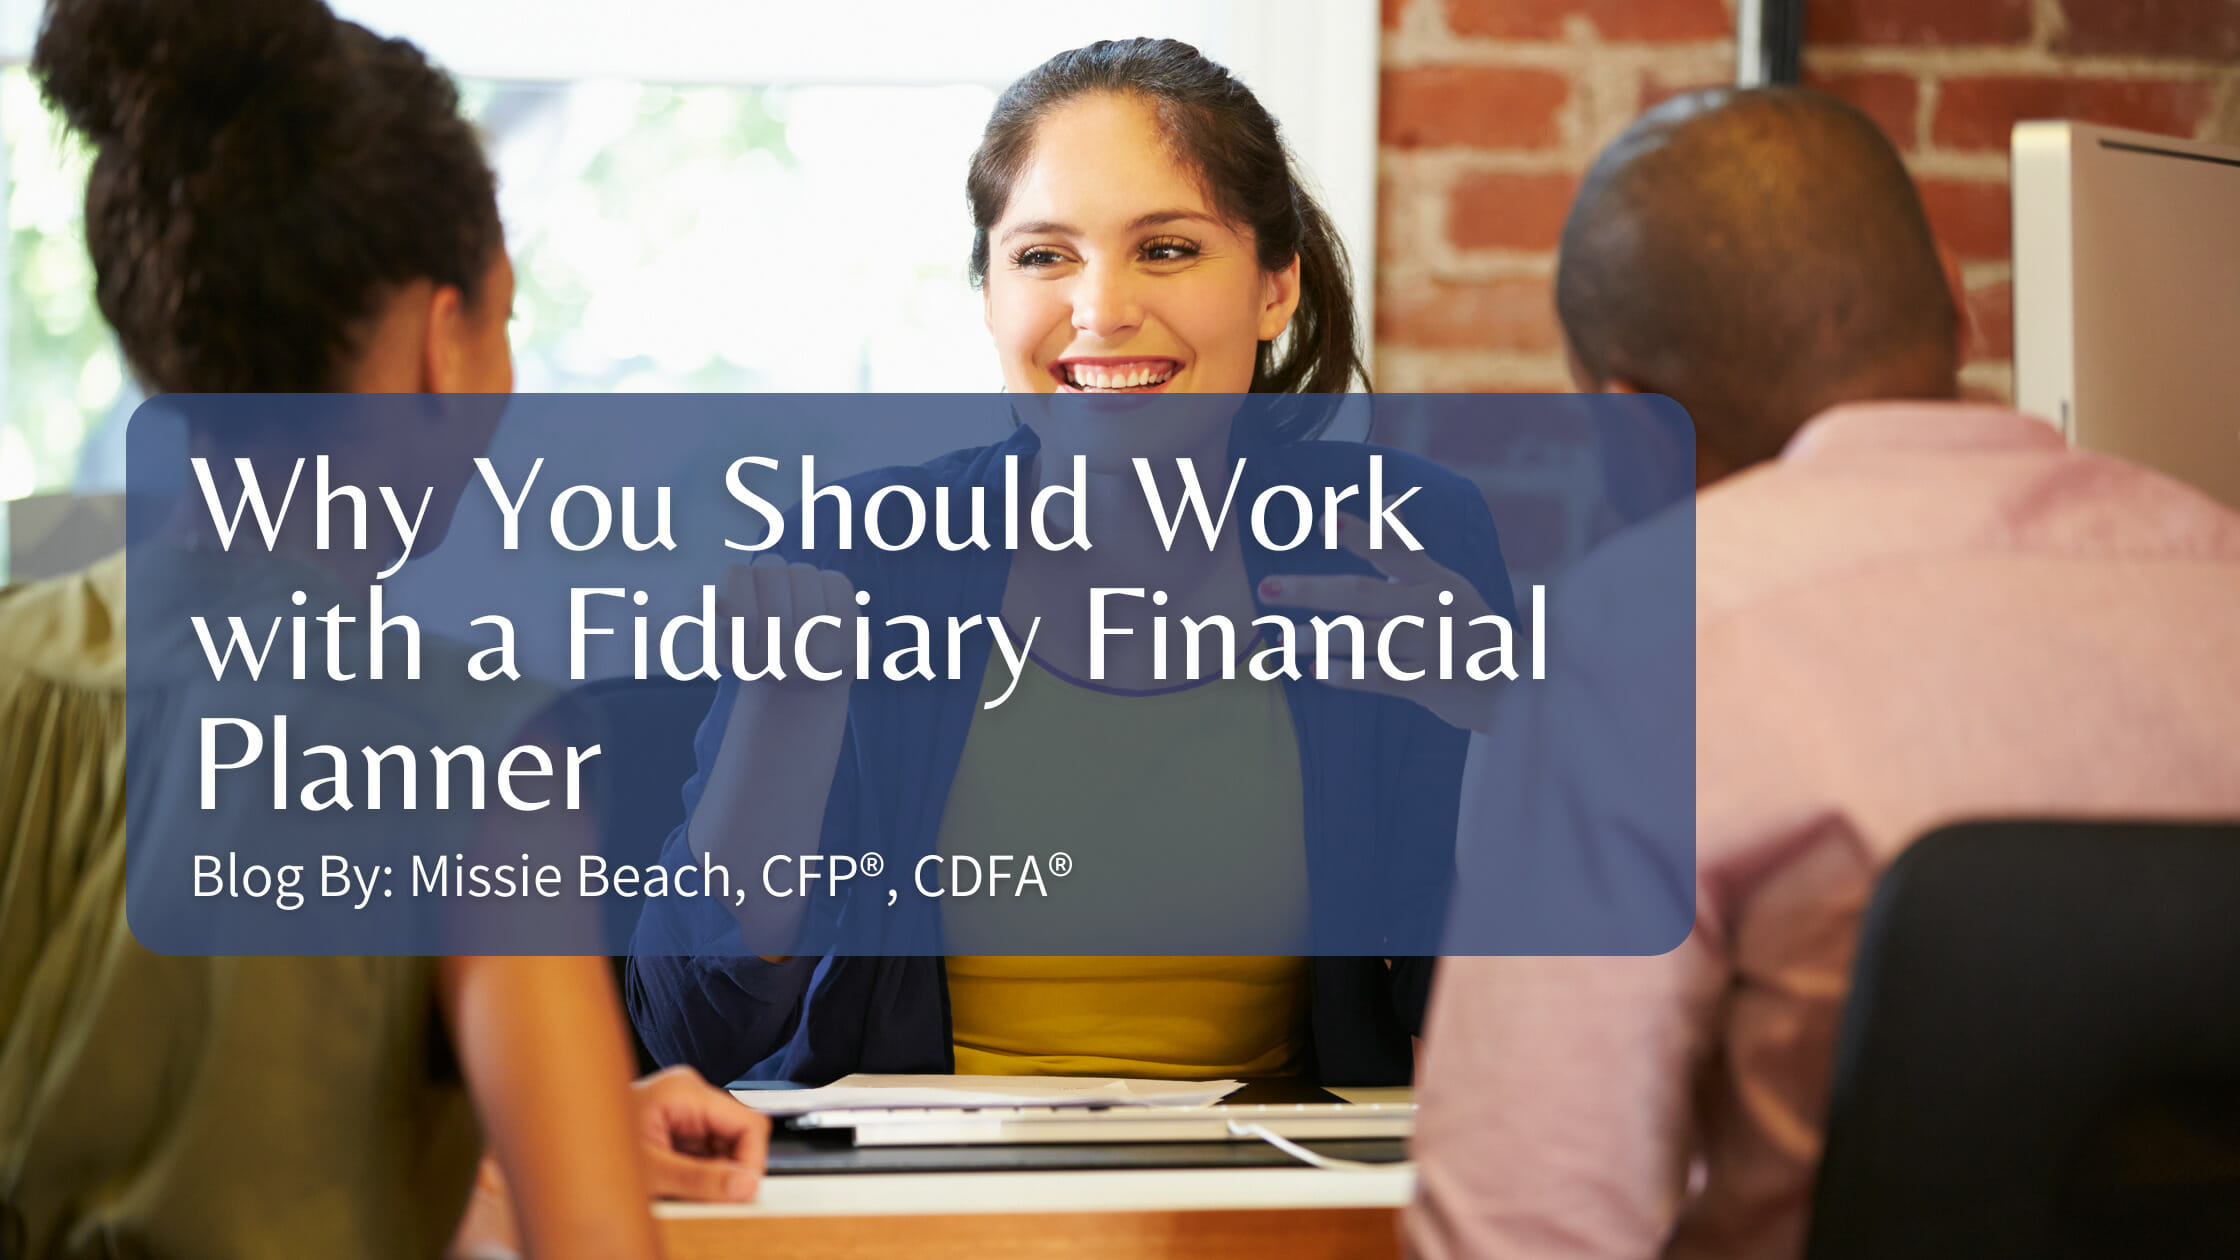 Why you should work with a fiduciary financial planner